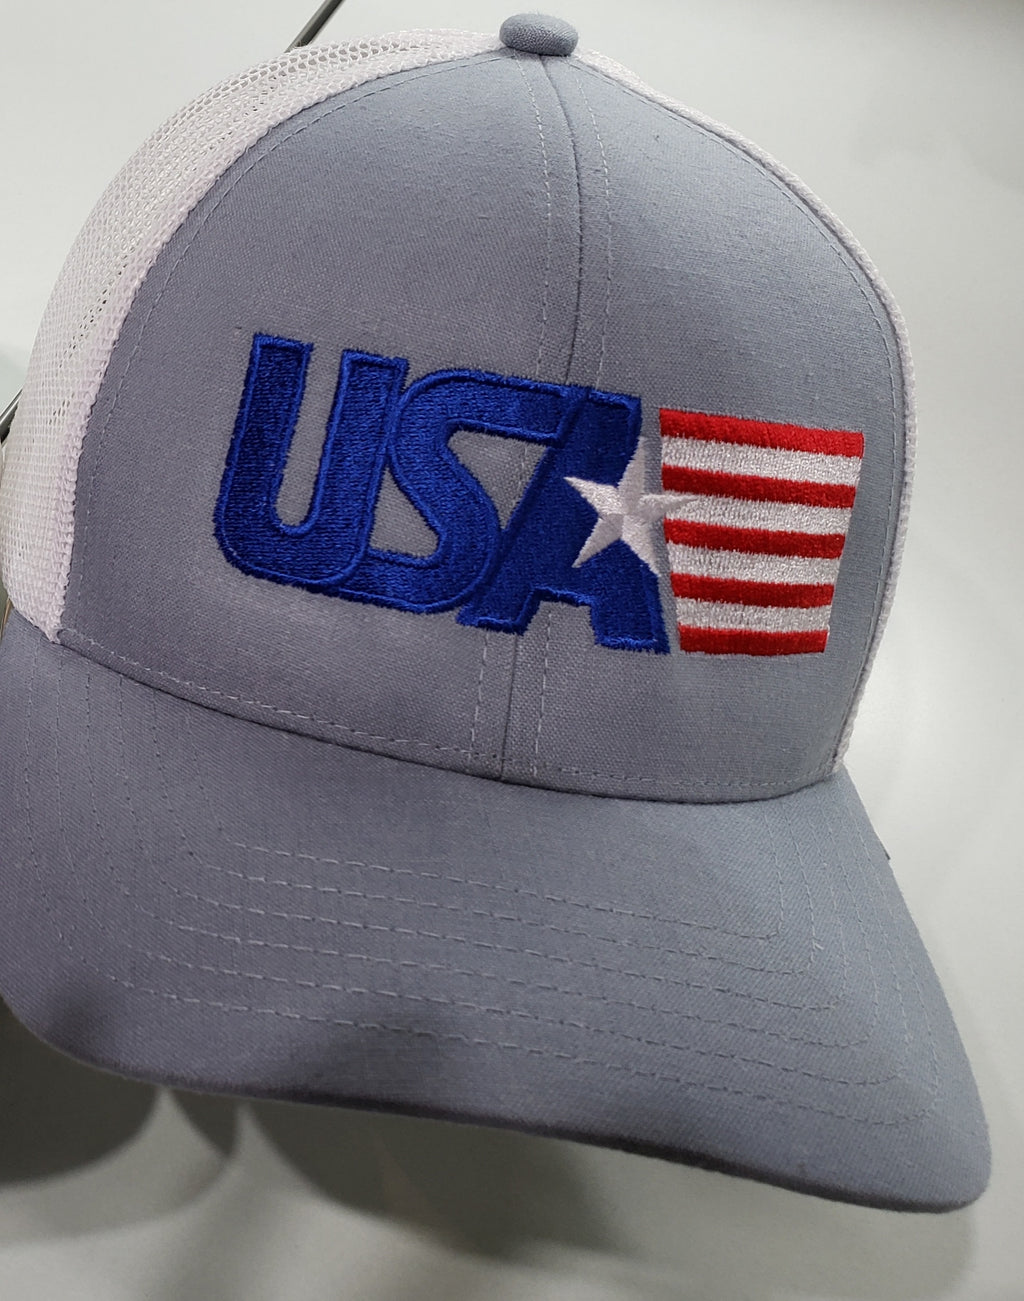 USA  cap in blue color with flag